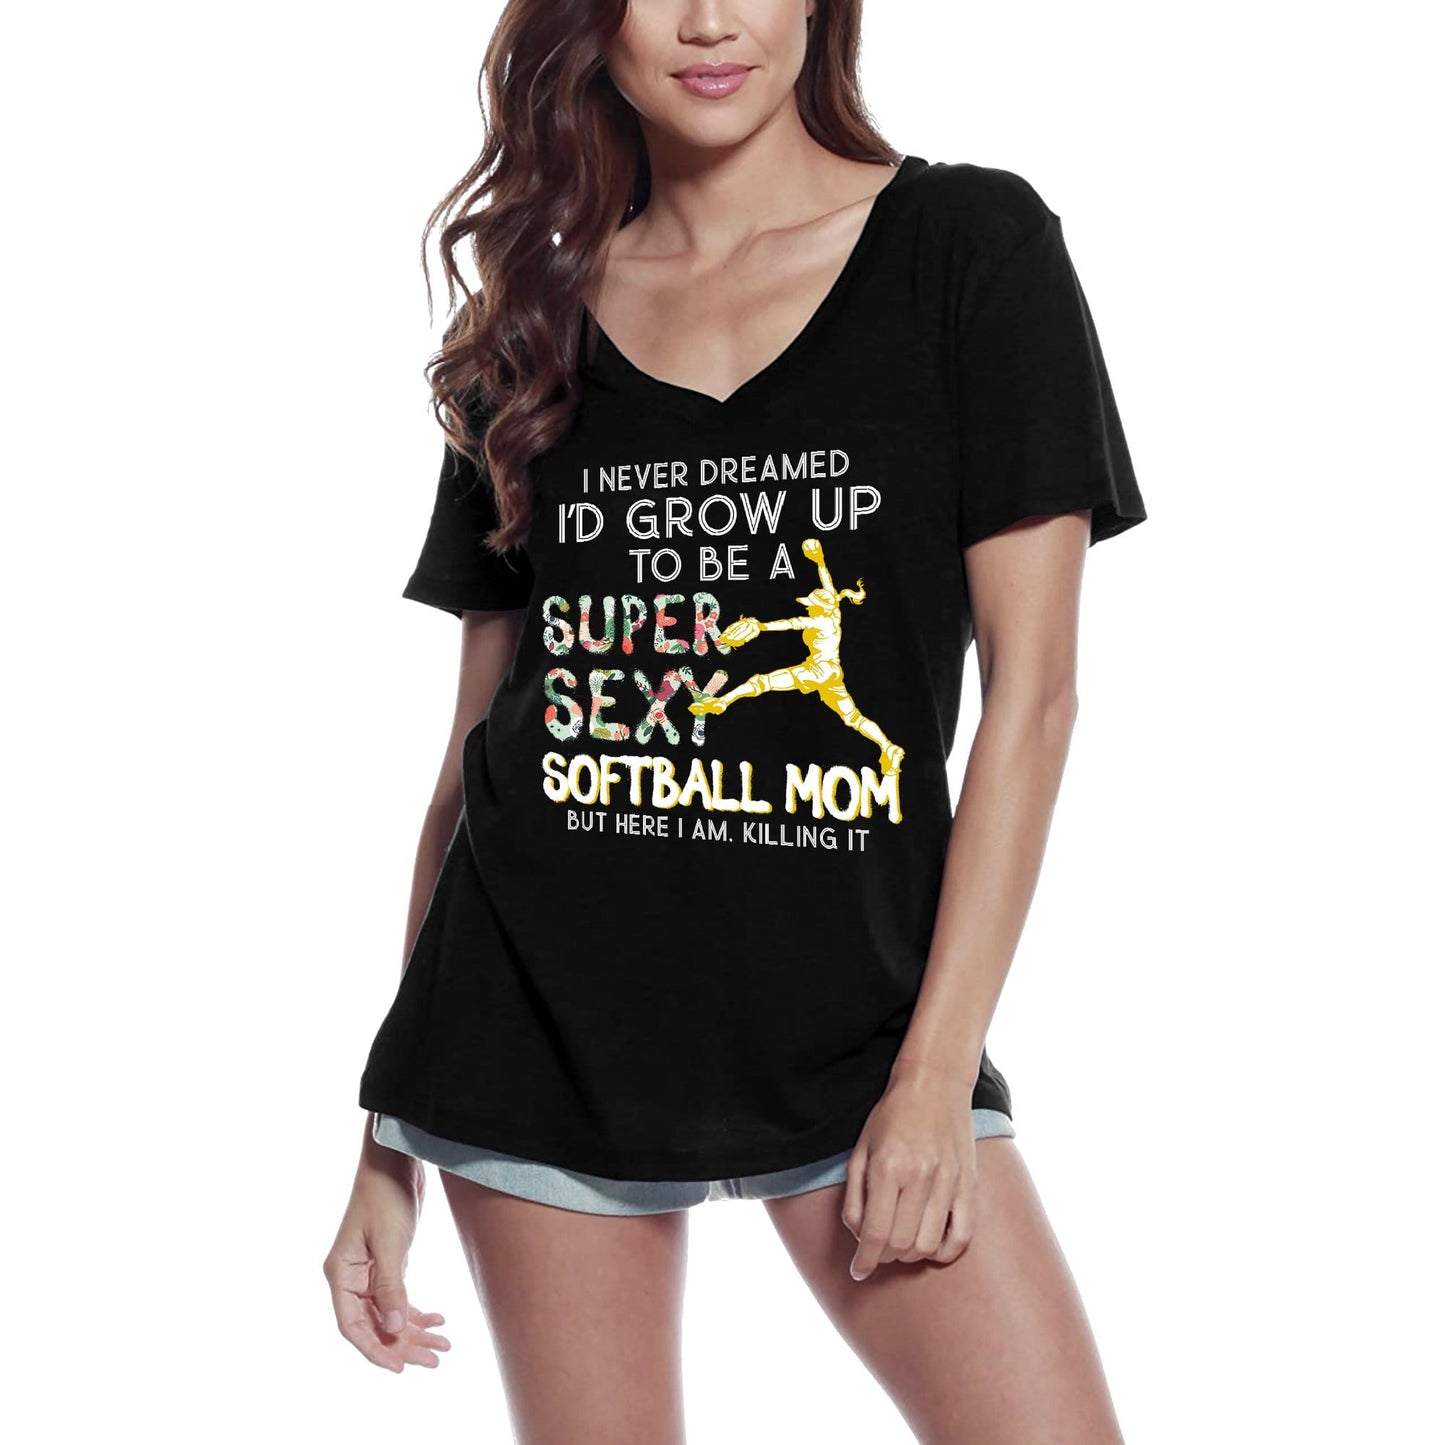 ULTRABASIC Damen-T-Shirt „I Never Dreamed I would Grow Up to be a Super Sexy Softball Mom“ – Lustiges Mutter-T-Shirt